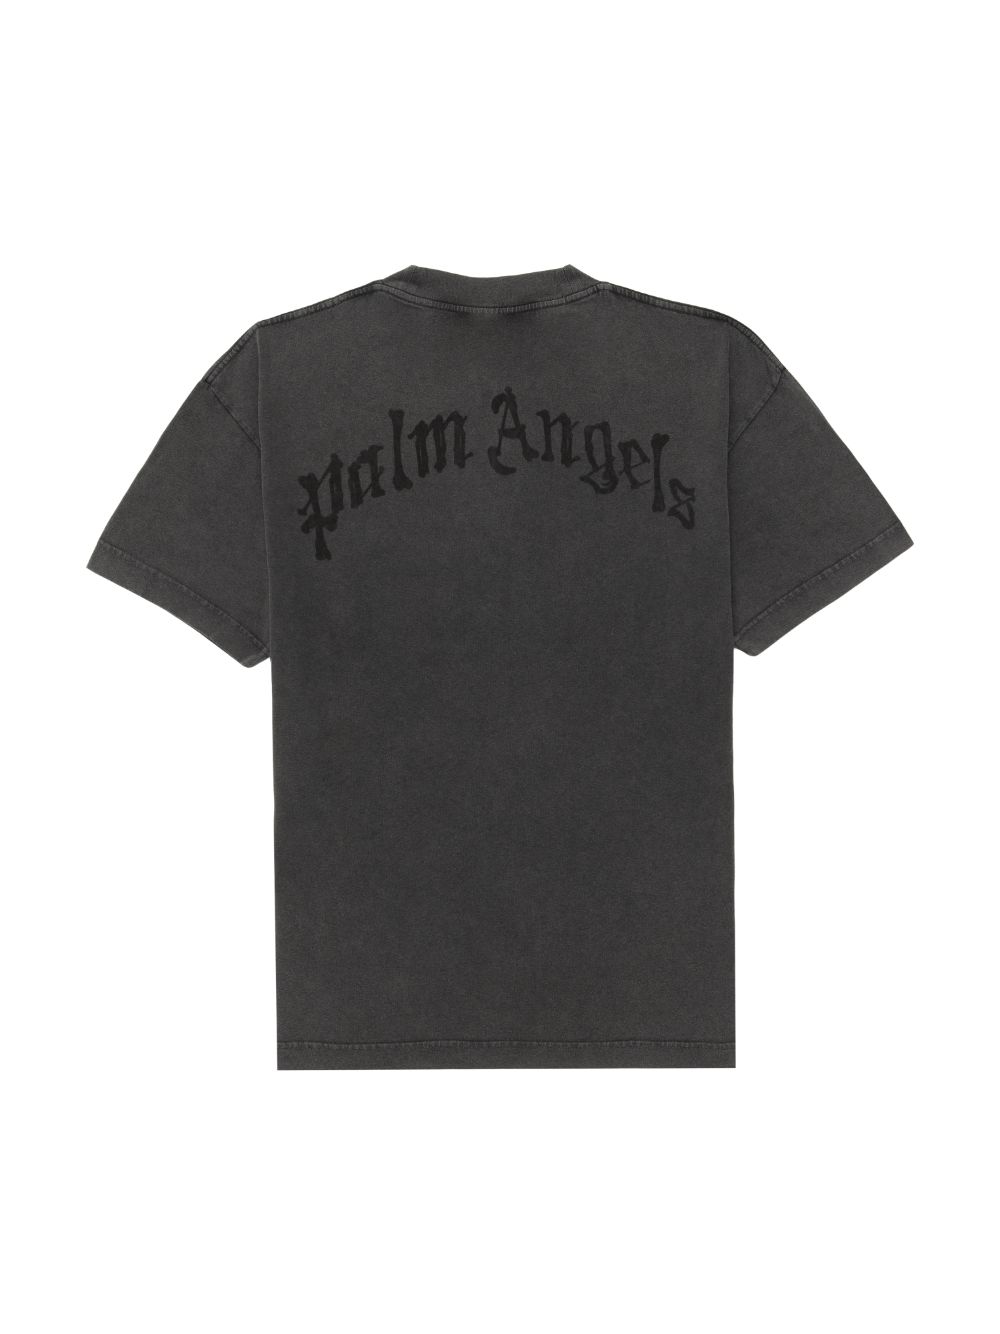 SKELETON S/S T-SHIRT in black - Palm Angels® Official